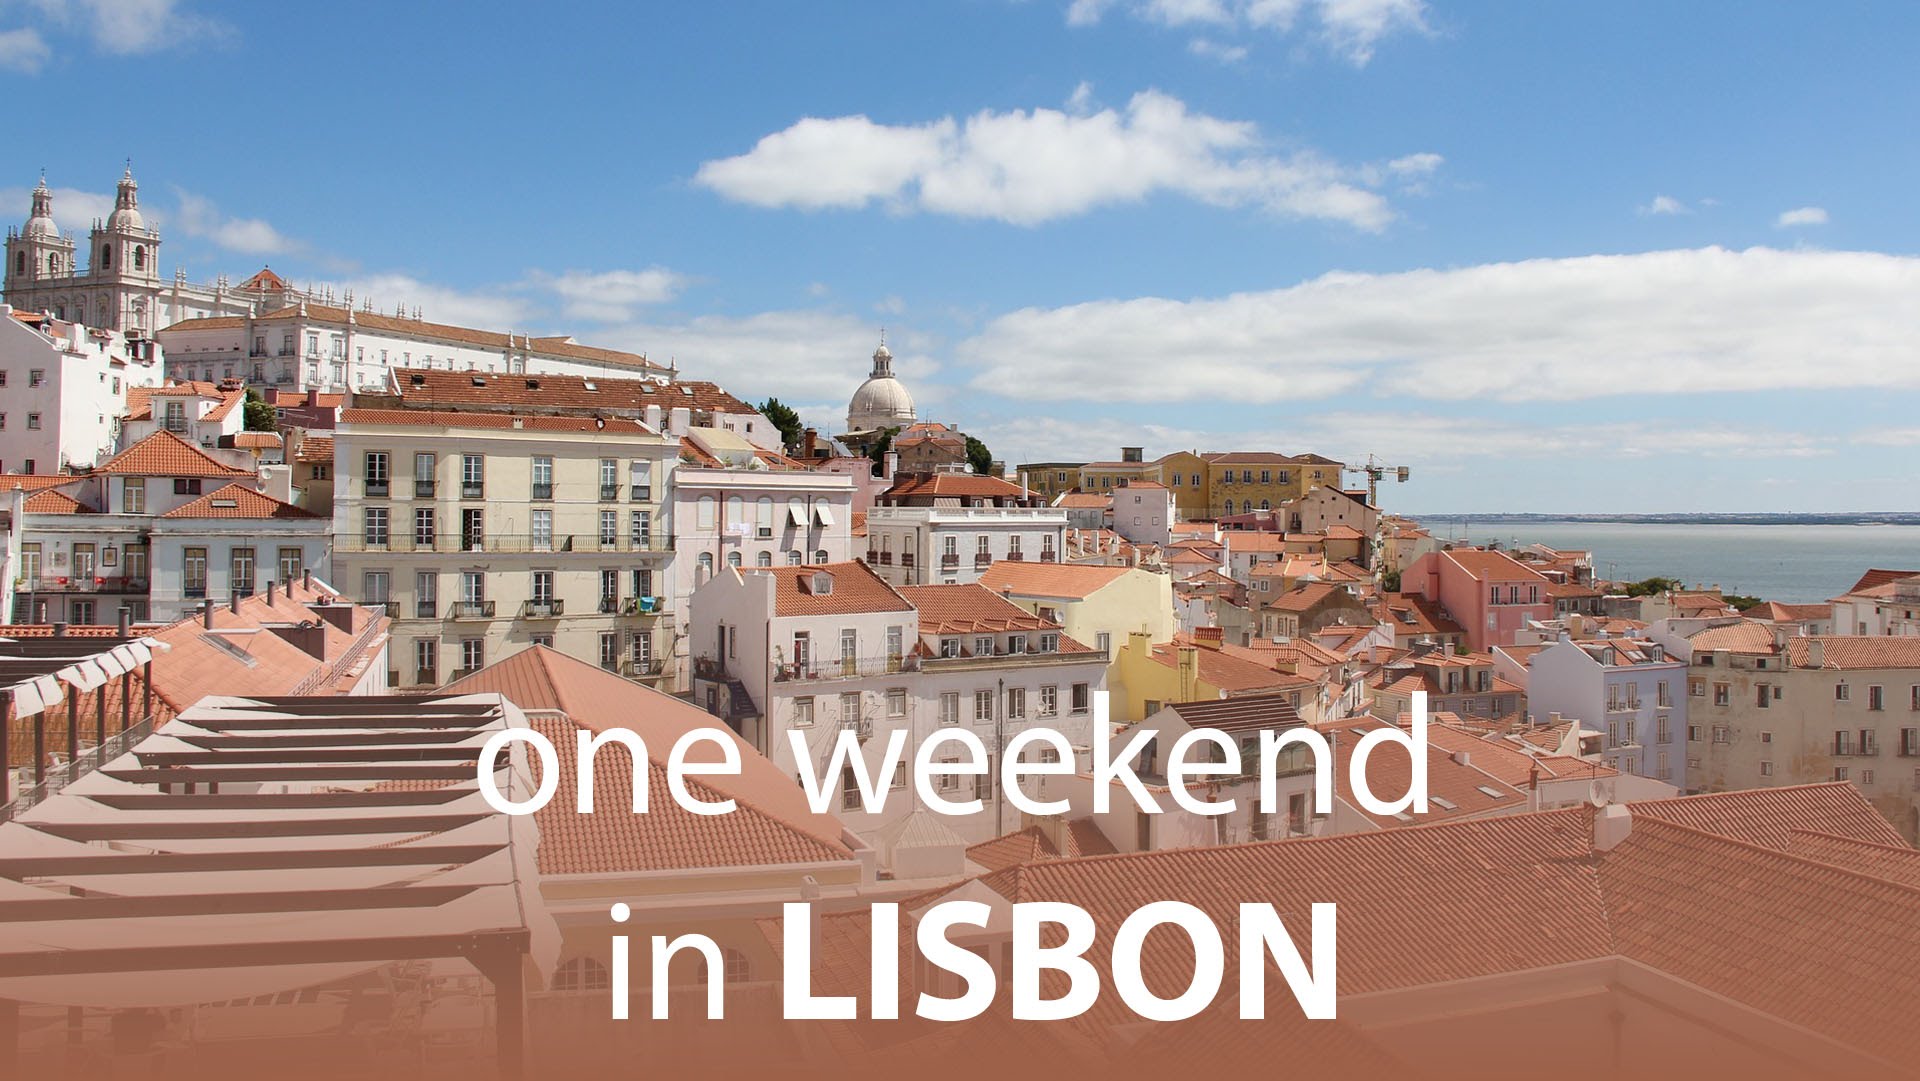 Your Weekend in LISBON - The perfect trip - YouTube